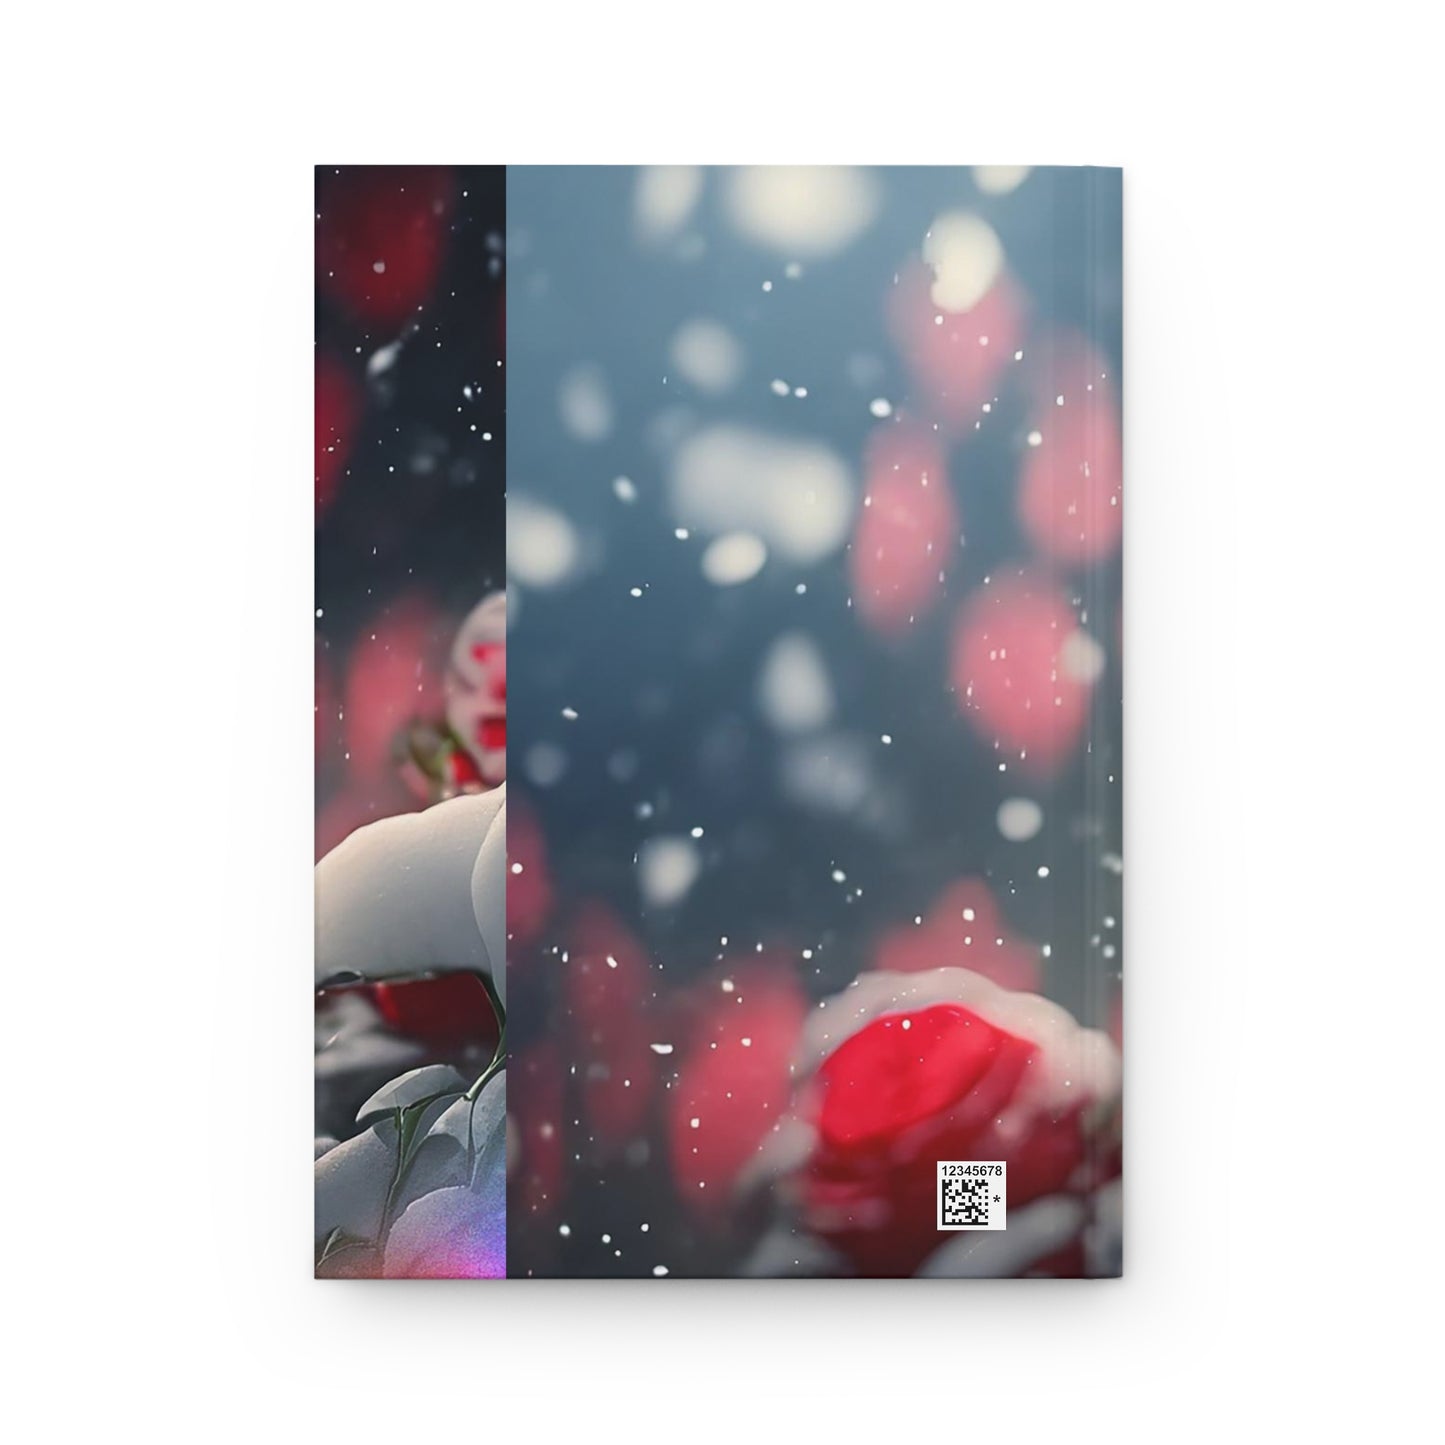 Red Rose Celeberating Life With The Snow  - Hardcover Journal Matte